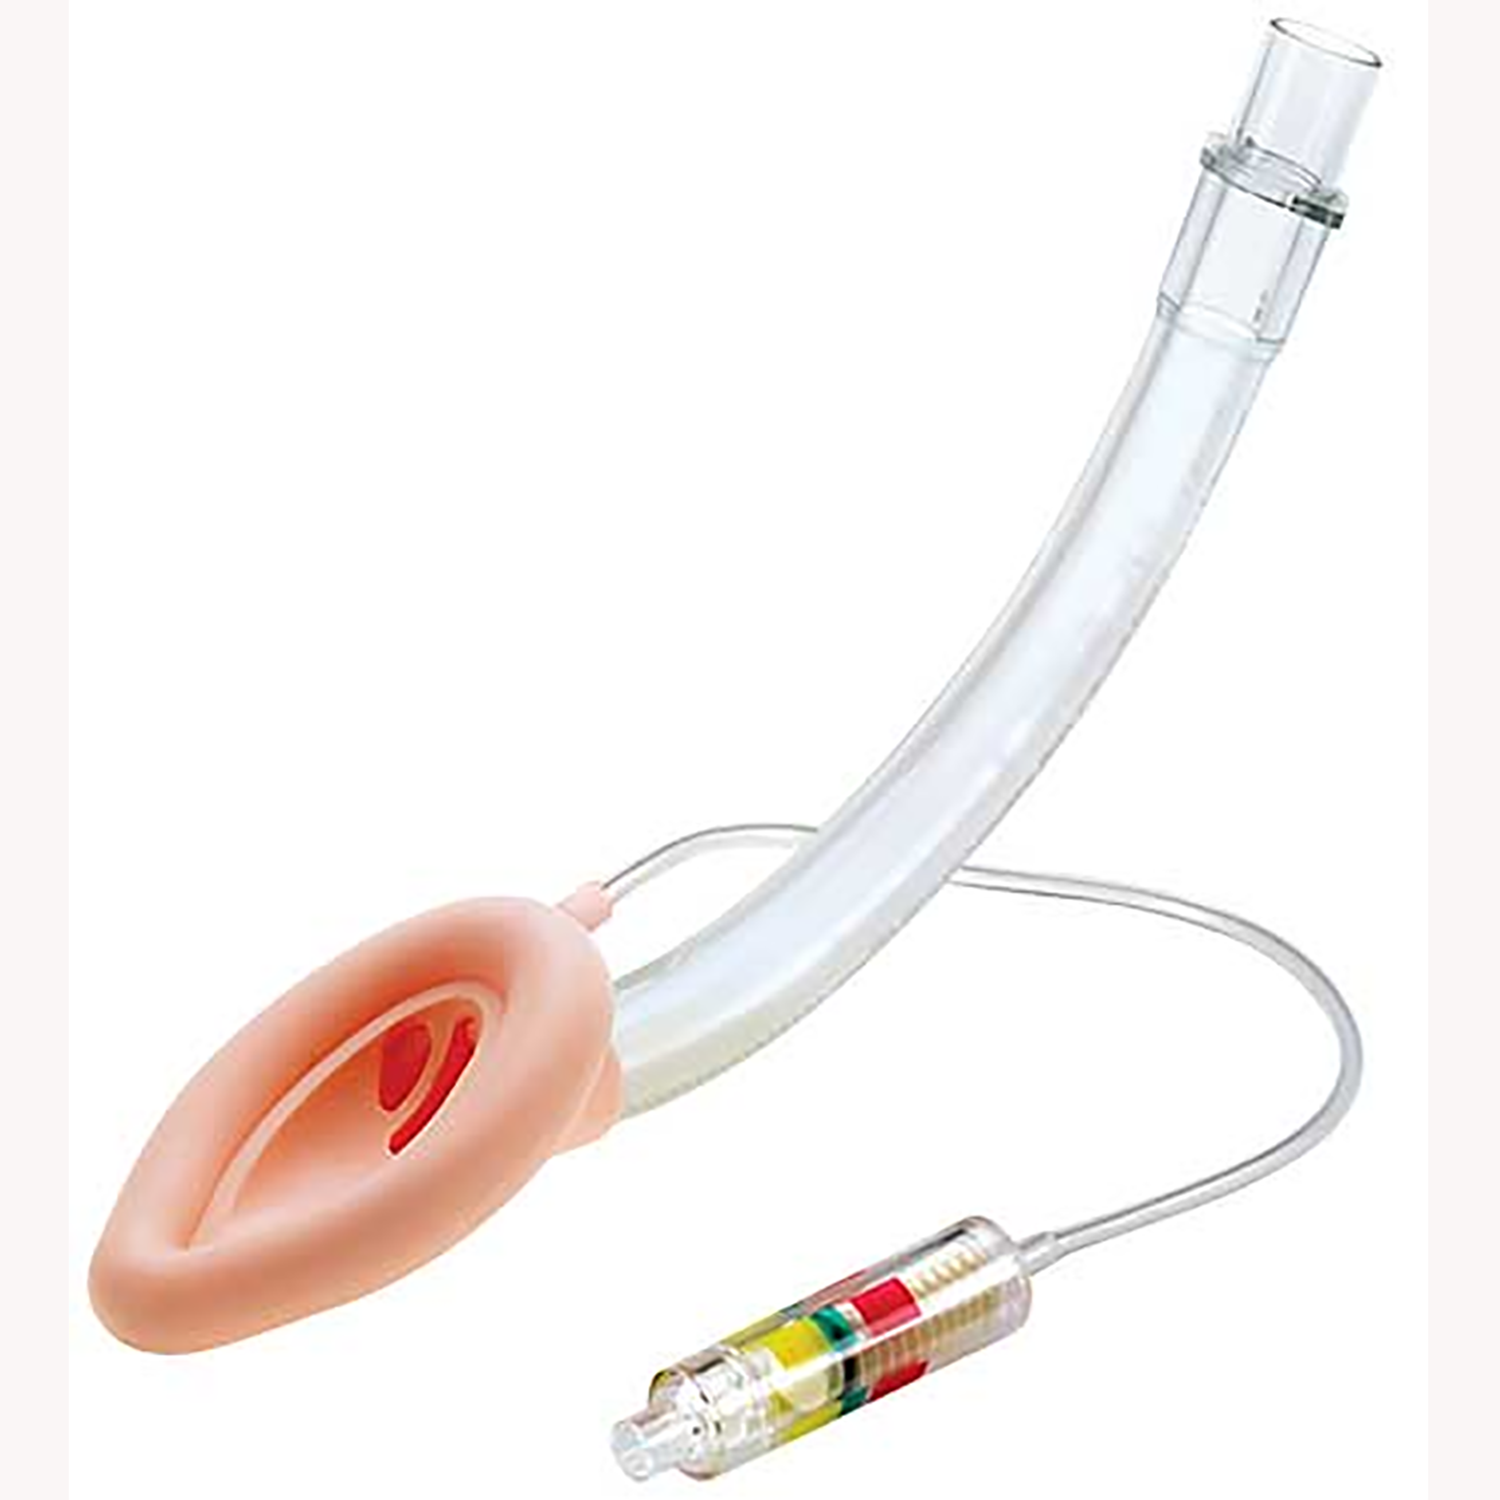 LMA/Unique Teleflex Laryngeal Mask | Single Use | Size 4 Normal Adult | Pack of 10